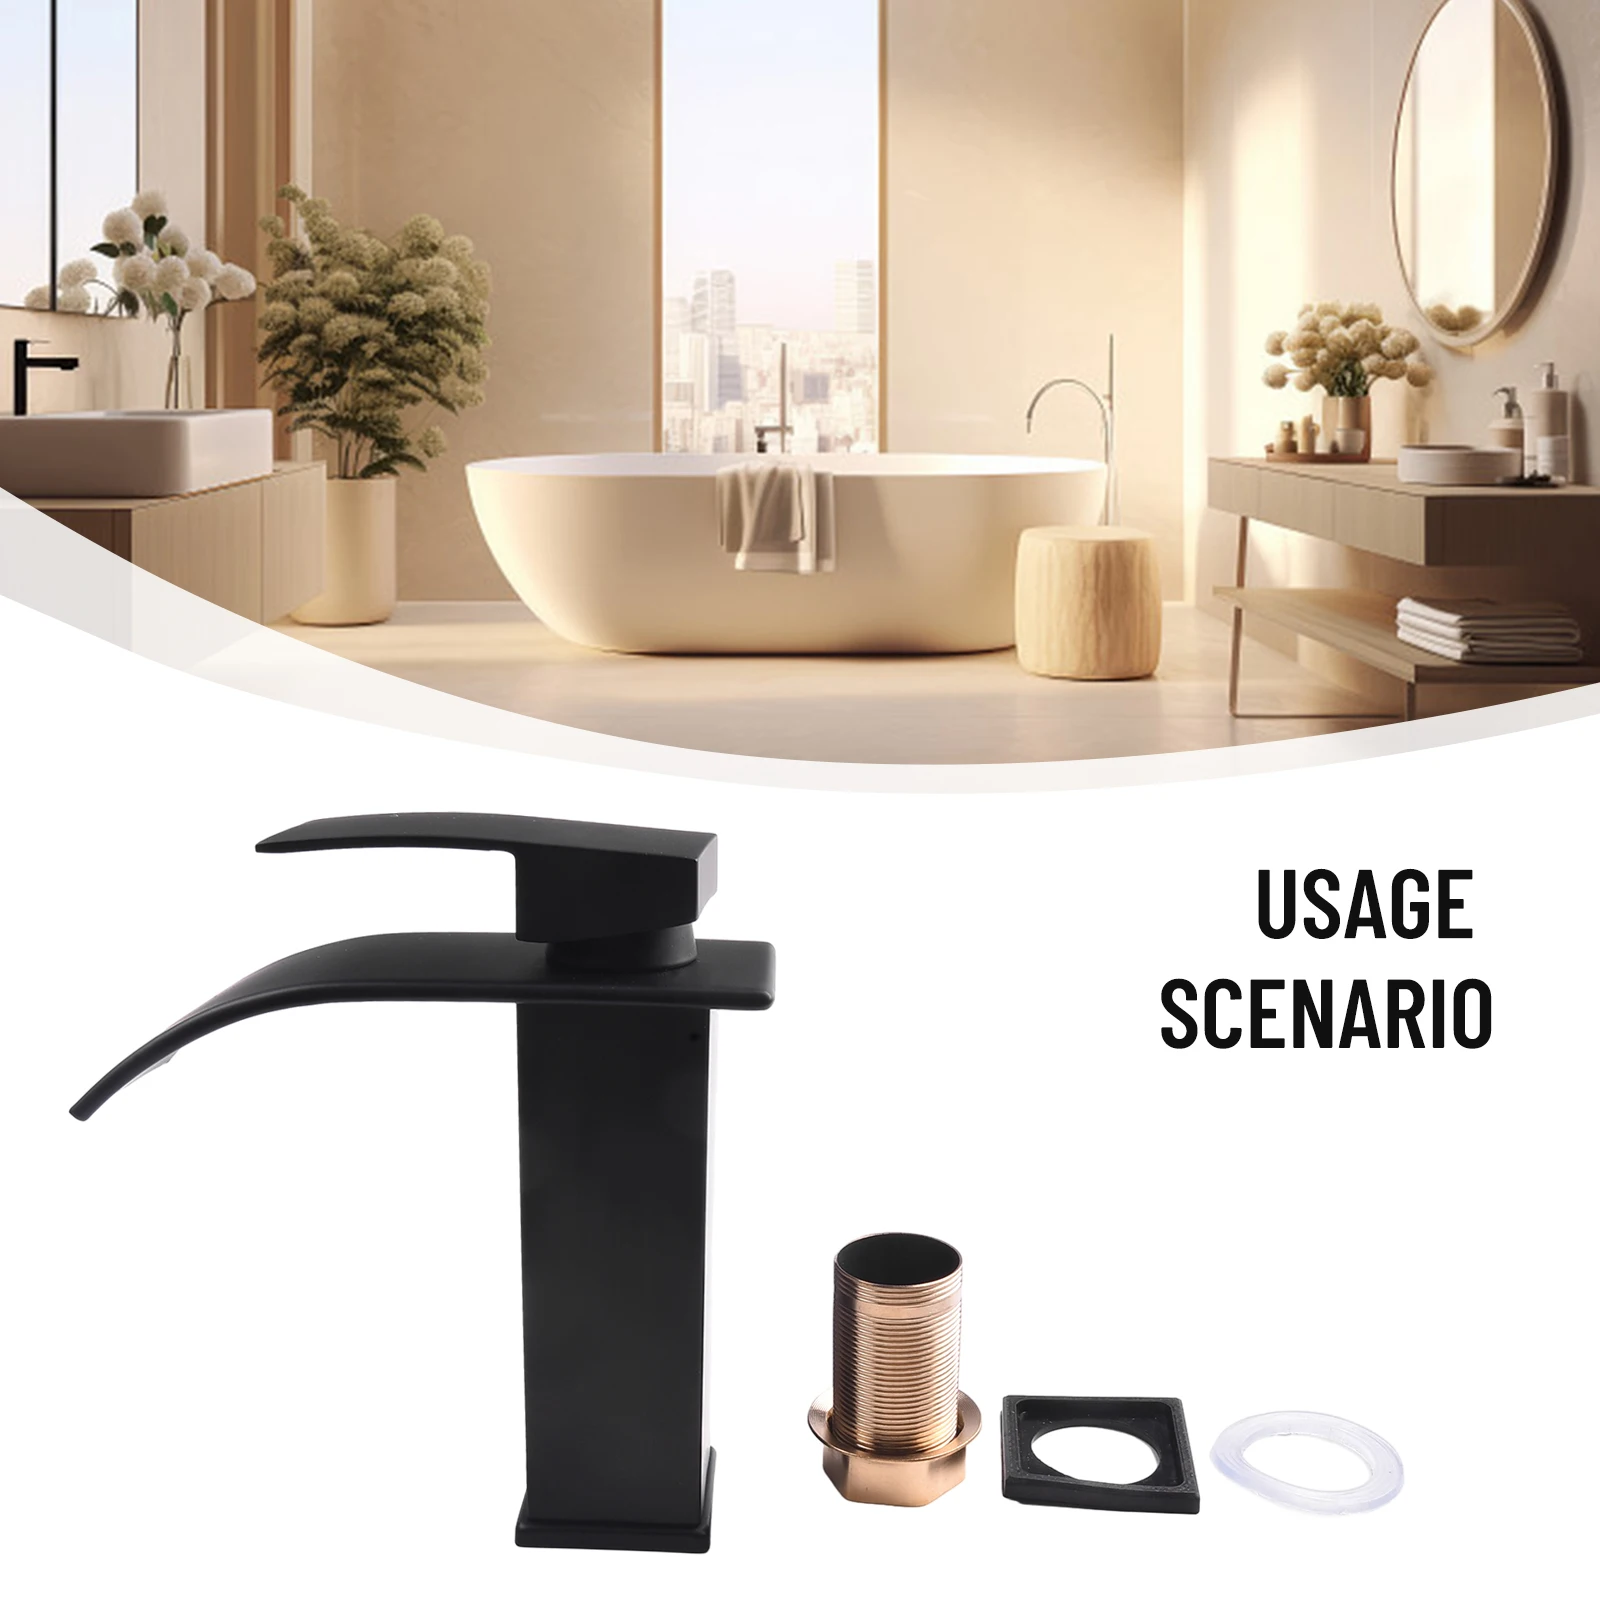 

Waterfall Basin Sink Faucet Black Faucets Brass Bath Faucets Hot&Cold Water Mixer Vanity Tap Deck Mounted Washbasin Taps